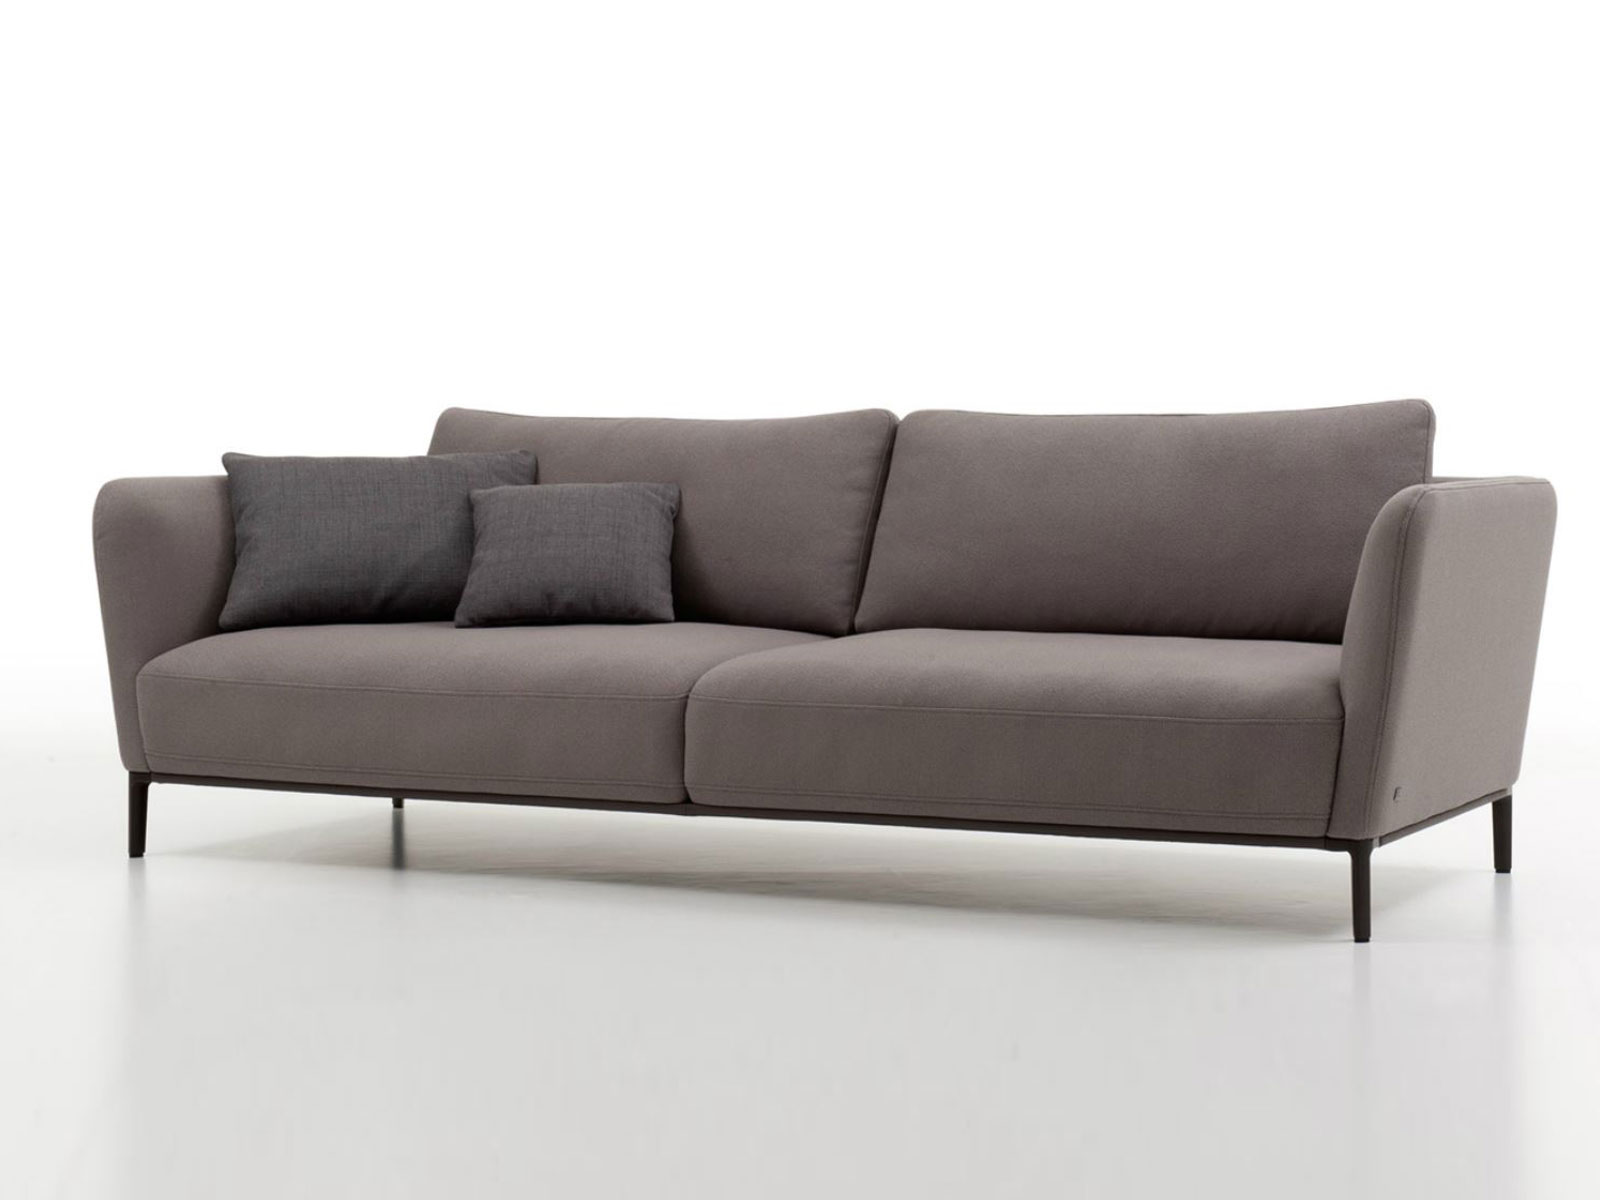 Grey Sofa Rolf Striking Grey Sofa Set From Rolf Benz Sofa Unit With Cushions Made From Fabric Material Finished In Modern Touch Furniture  Rolf Benz Sofa Firms Innovation 